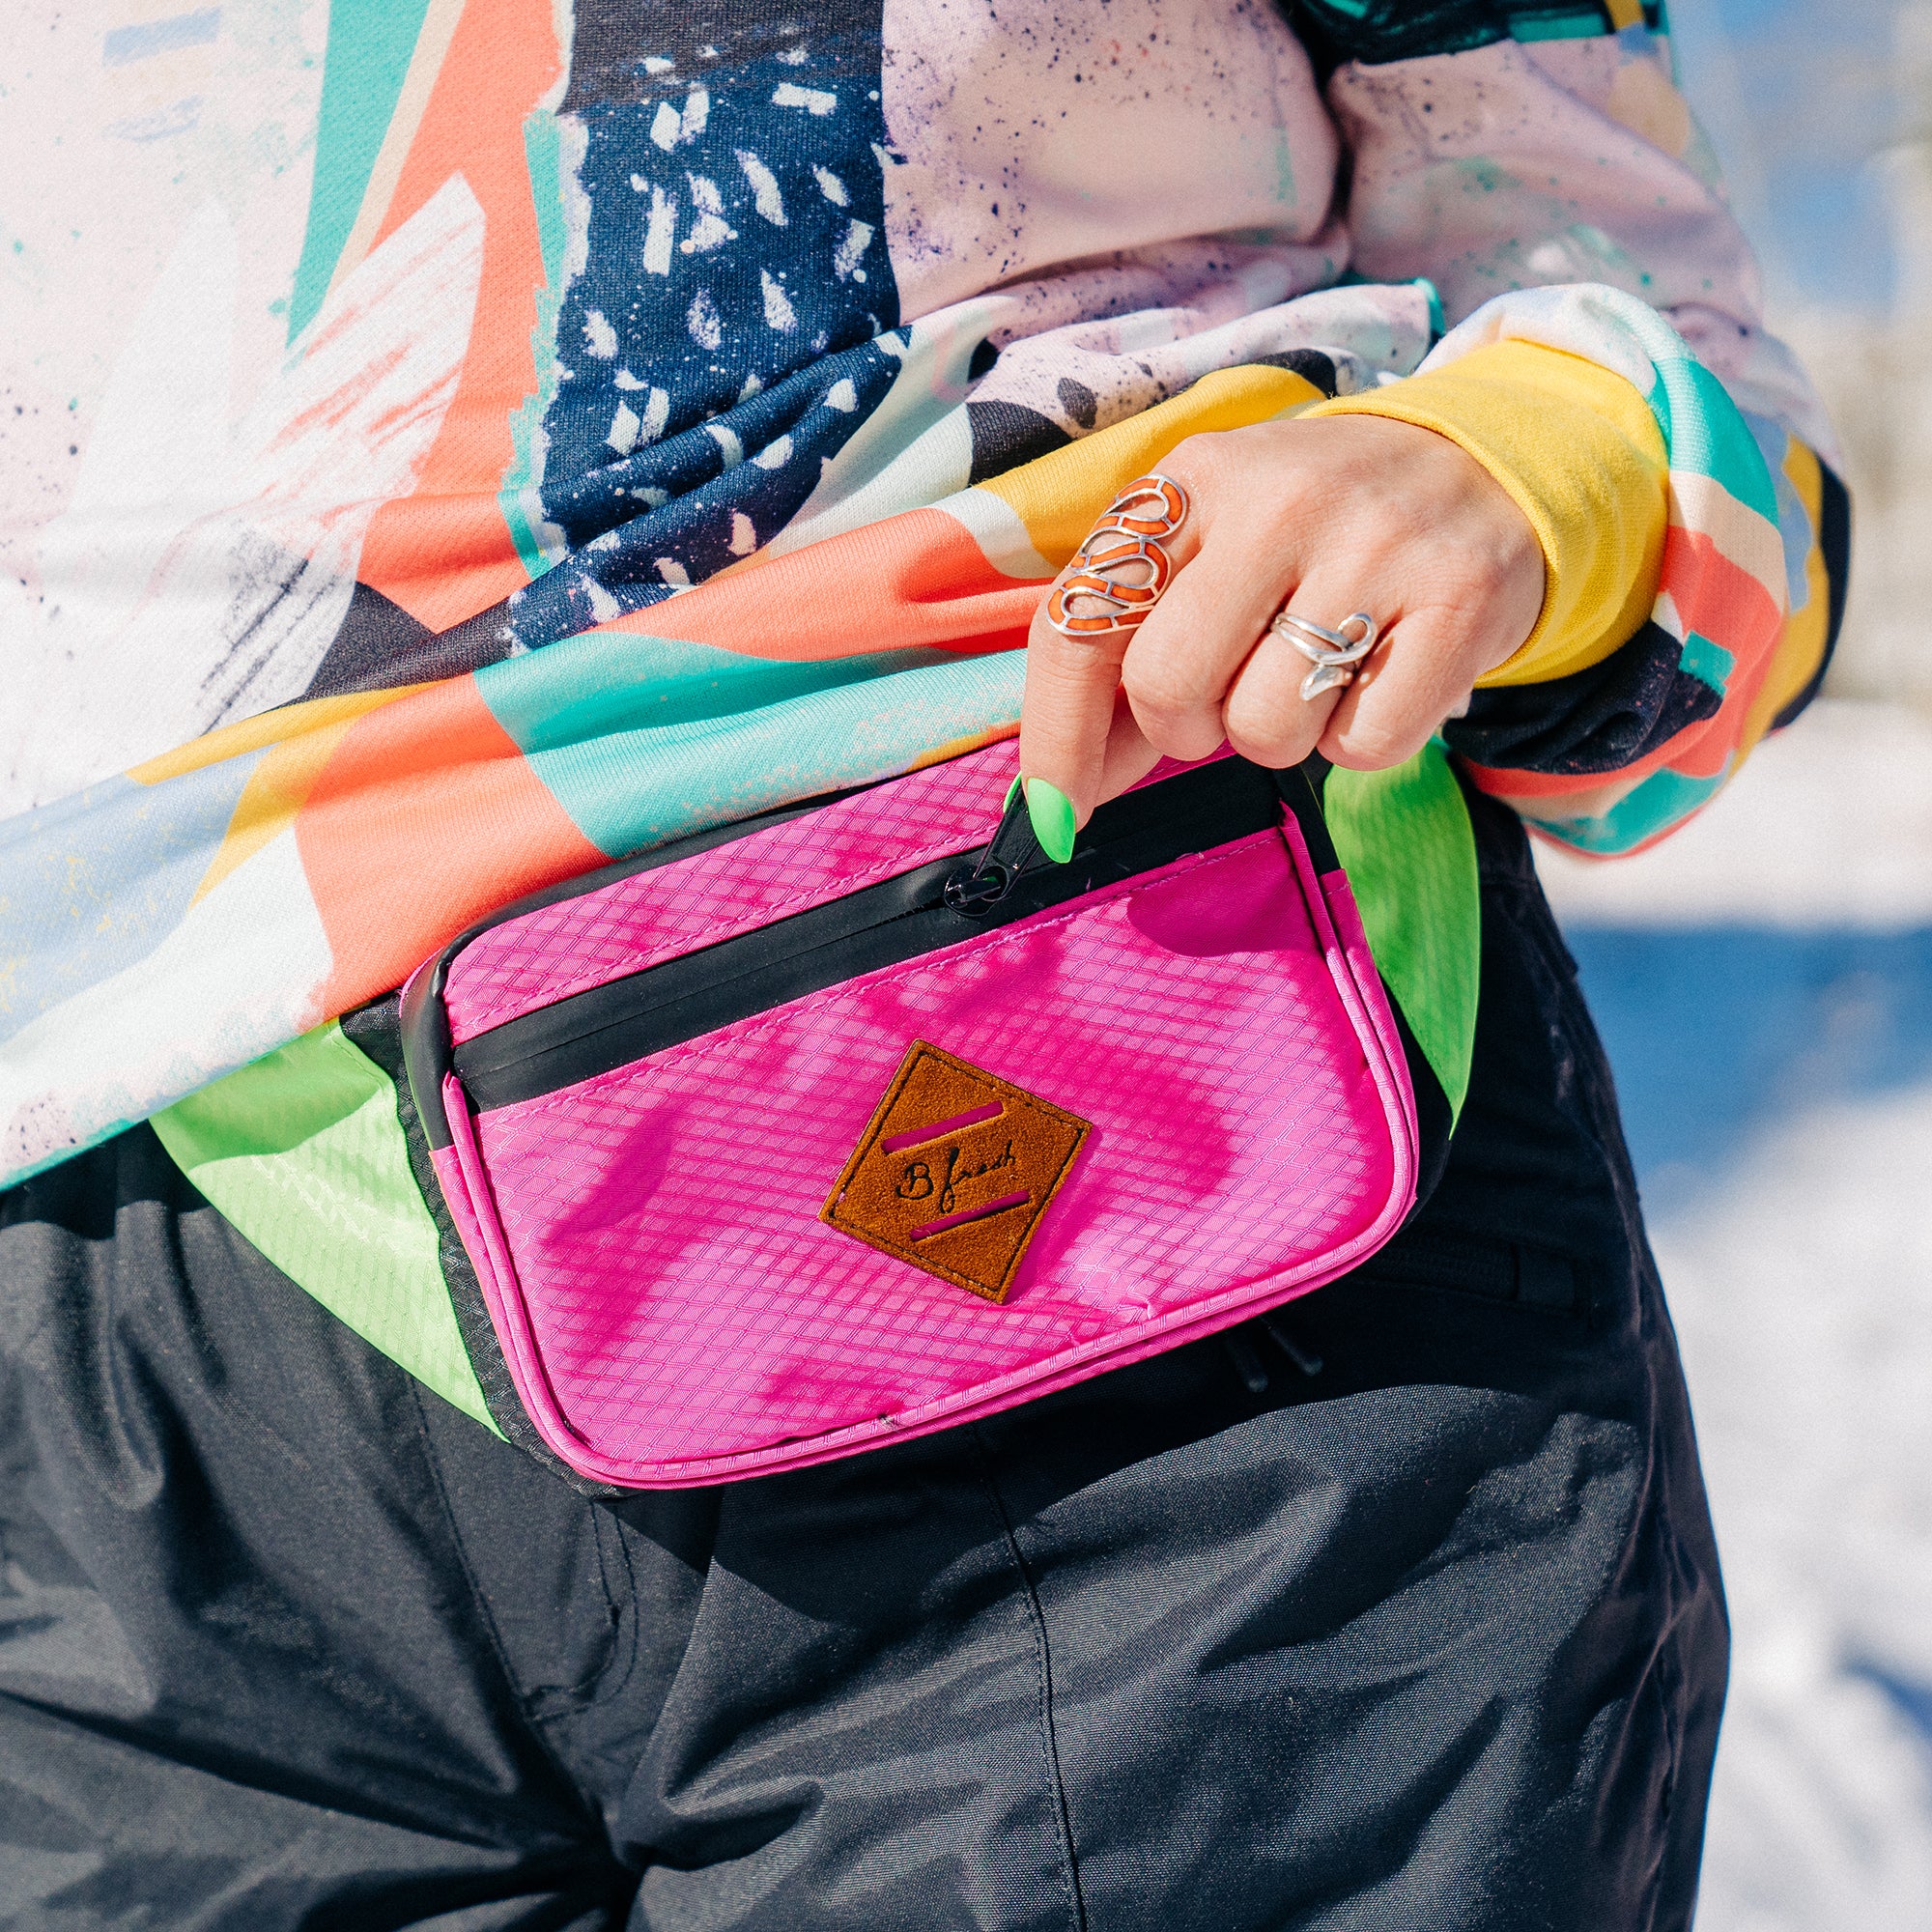 80's Ski Party Water Resistant Fanny Pack - 4 pocket fanny pack bum bag with waterproof material water resistant zippers 4 pouches. With vintage throwback pink bright green and black ski party design. B Fresh Gear